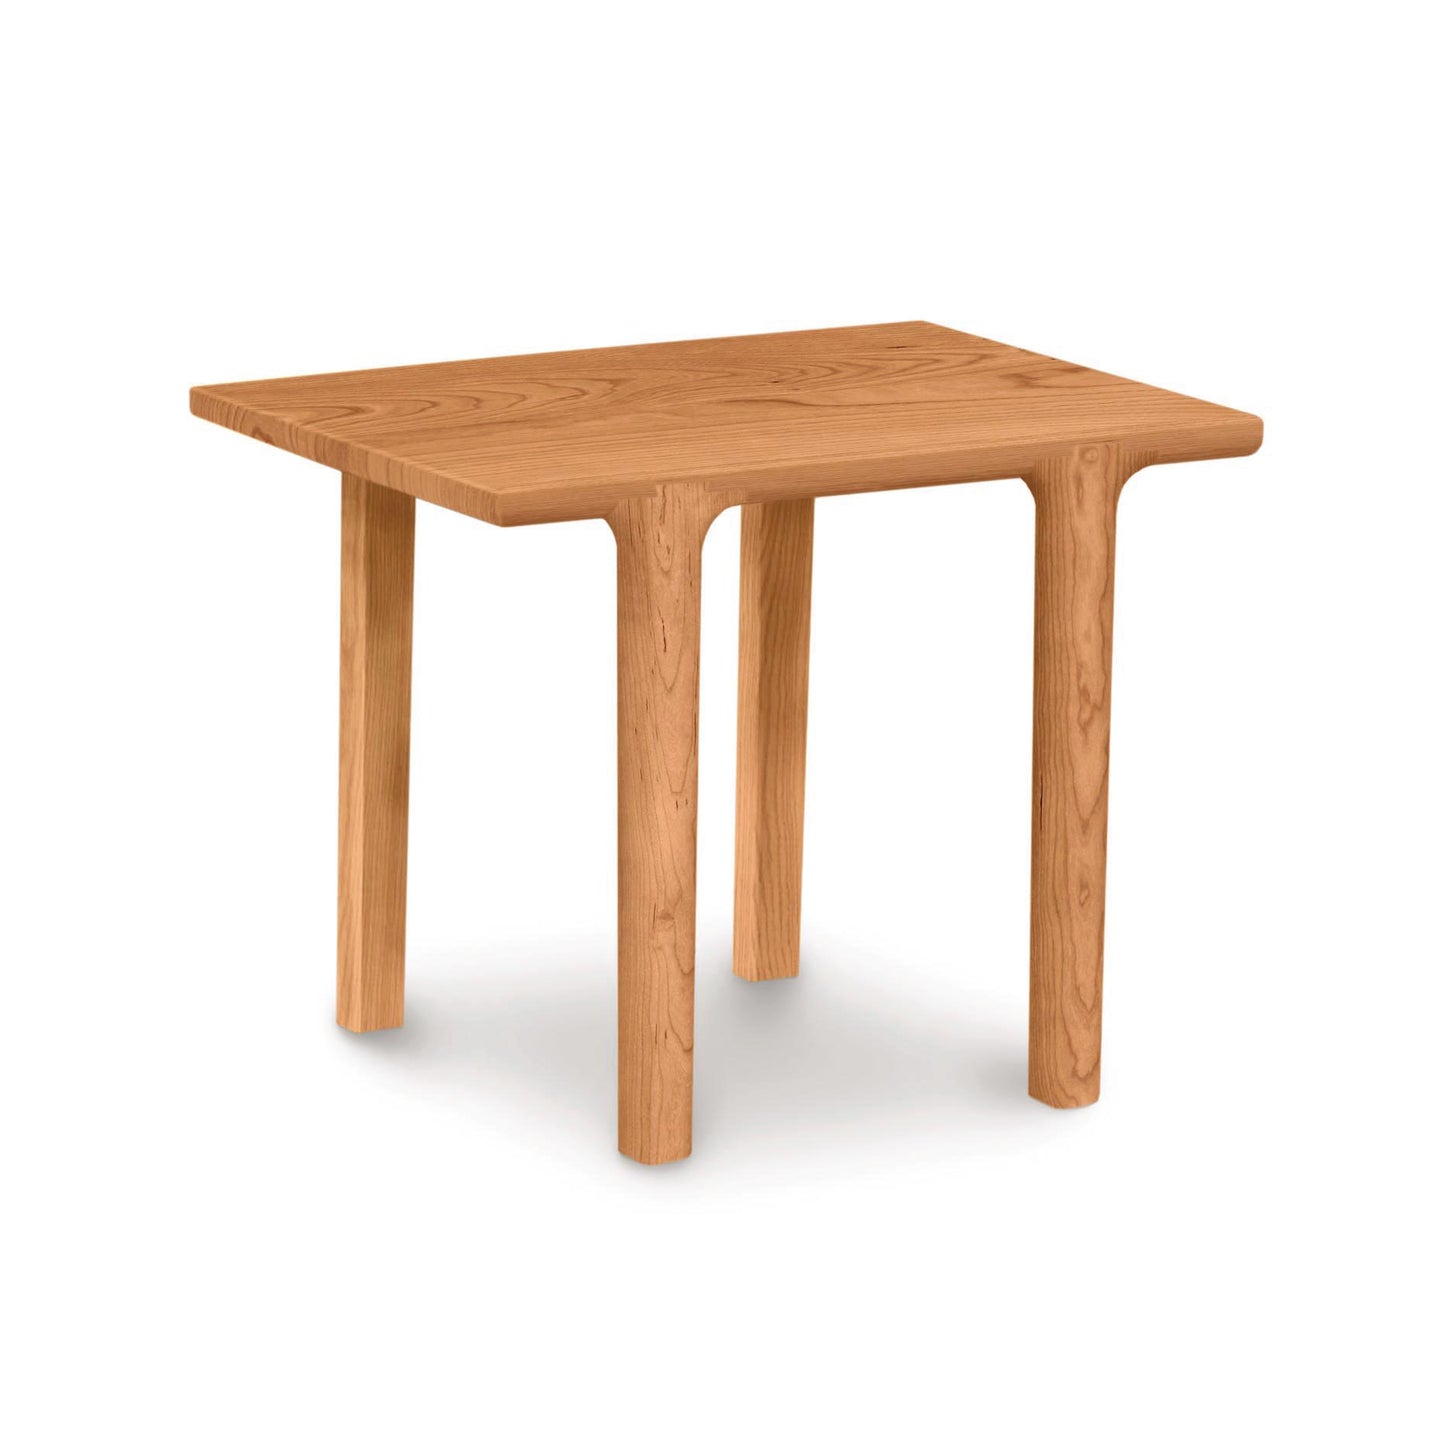 A simple Copeland Furniture Sierra Rectangular End Table made from solid North American hardwood with four legs on a white background.